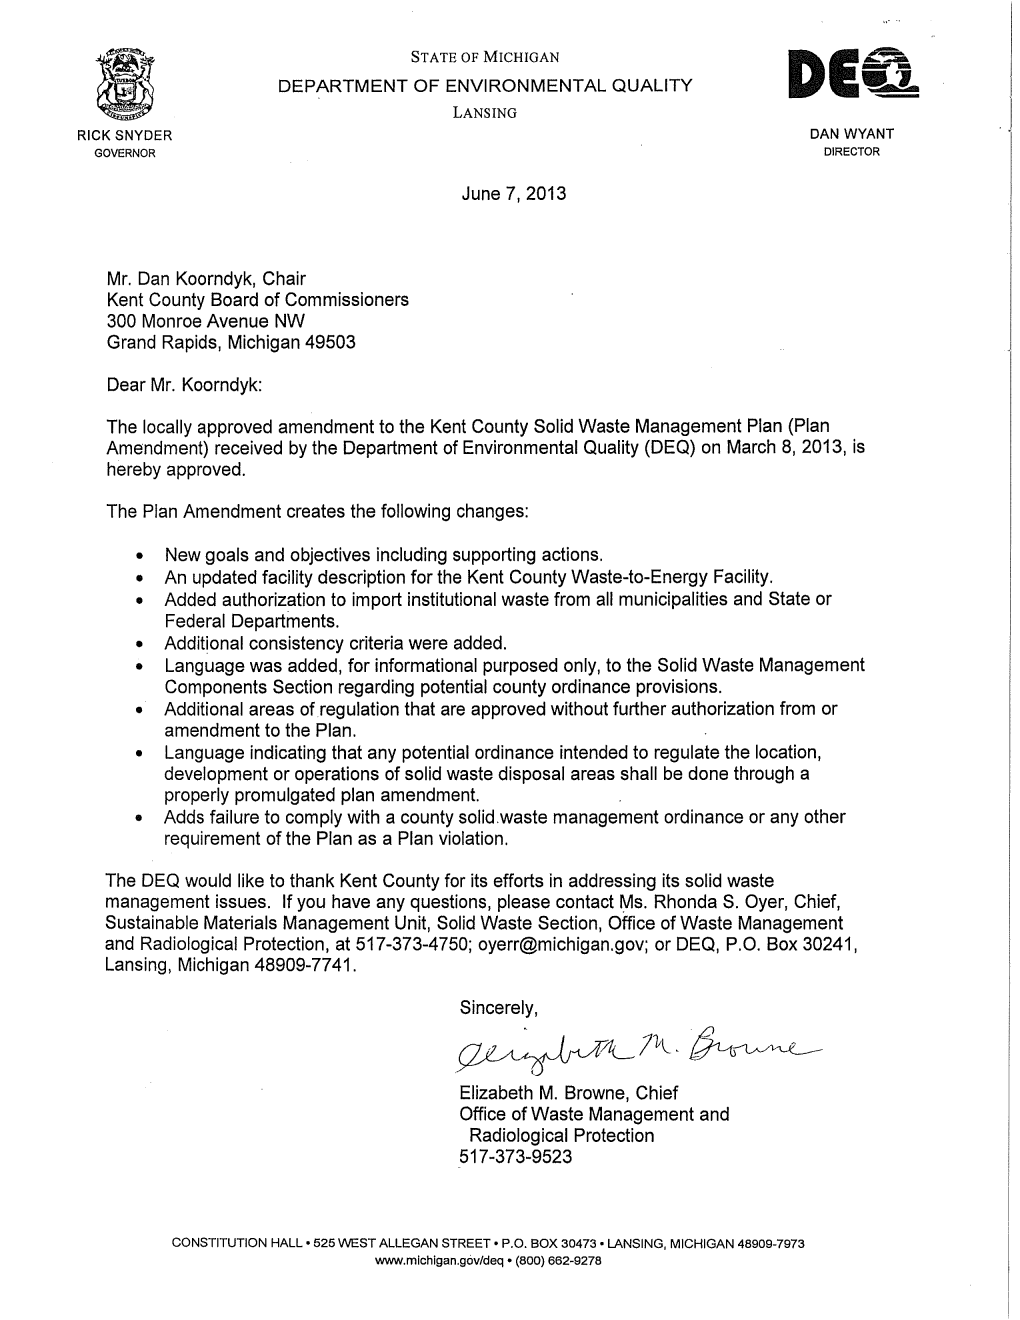 Kent County Solid Waste Management Plan (Plan Amendment) Received by the Department of Environmental Quality (DEQ) on March 8, 2013, Is Hereby Approved